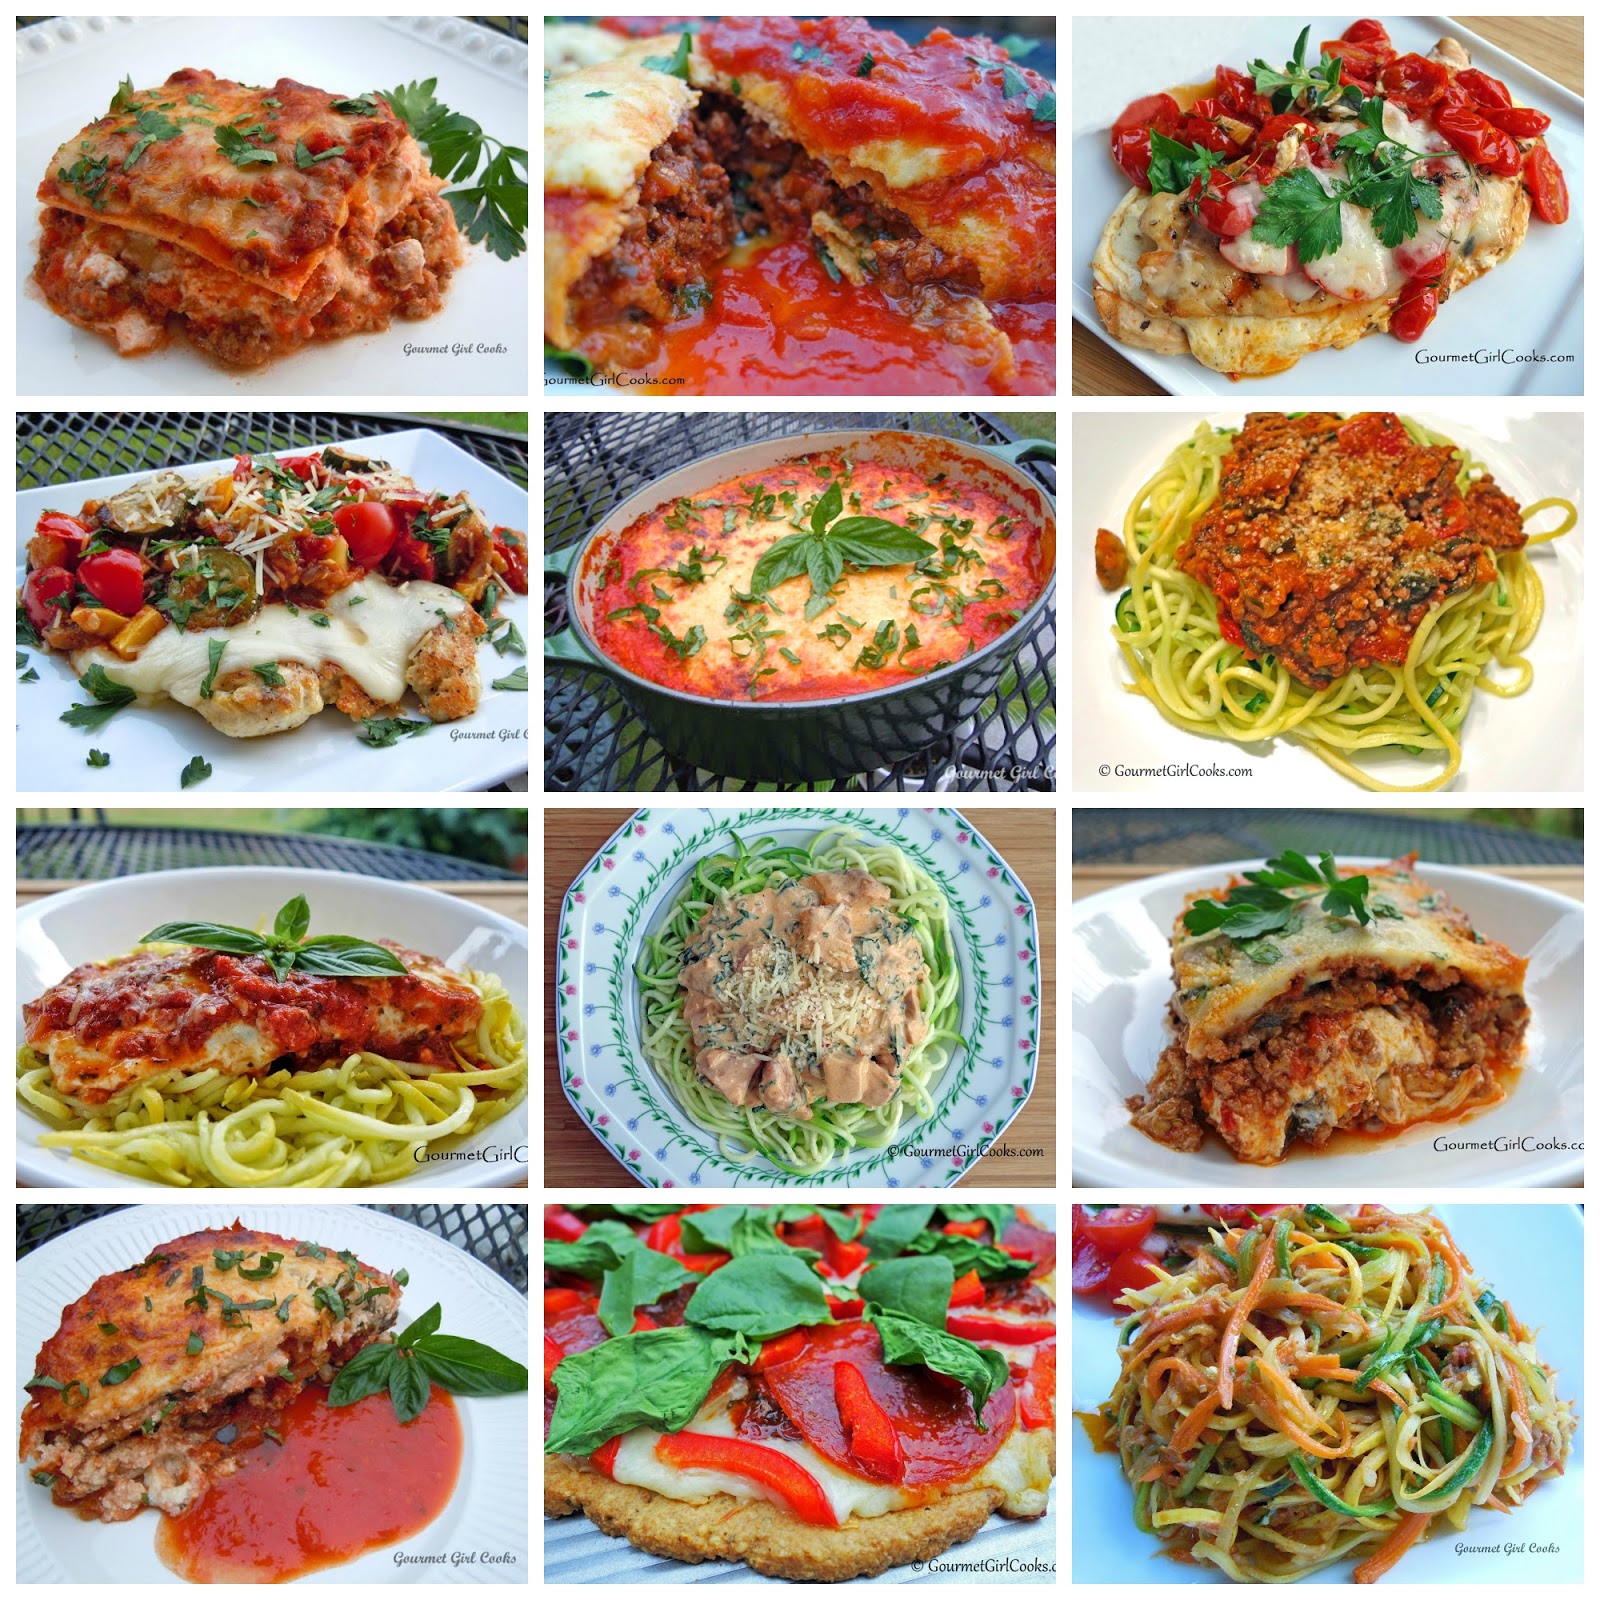 Gourmet Girl Cooks: 16 Low Carb Italian Recipes - A Collection of My ...